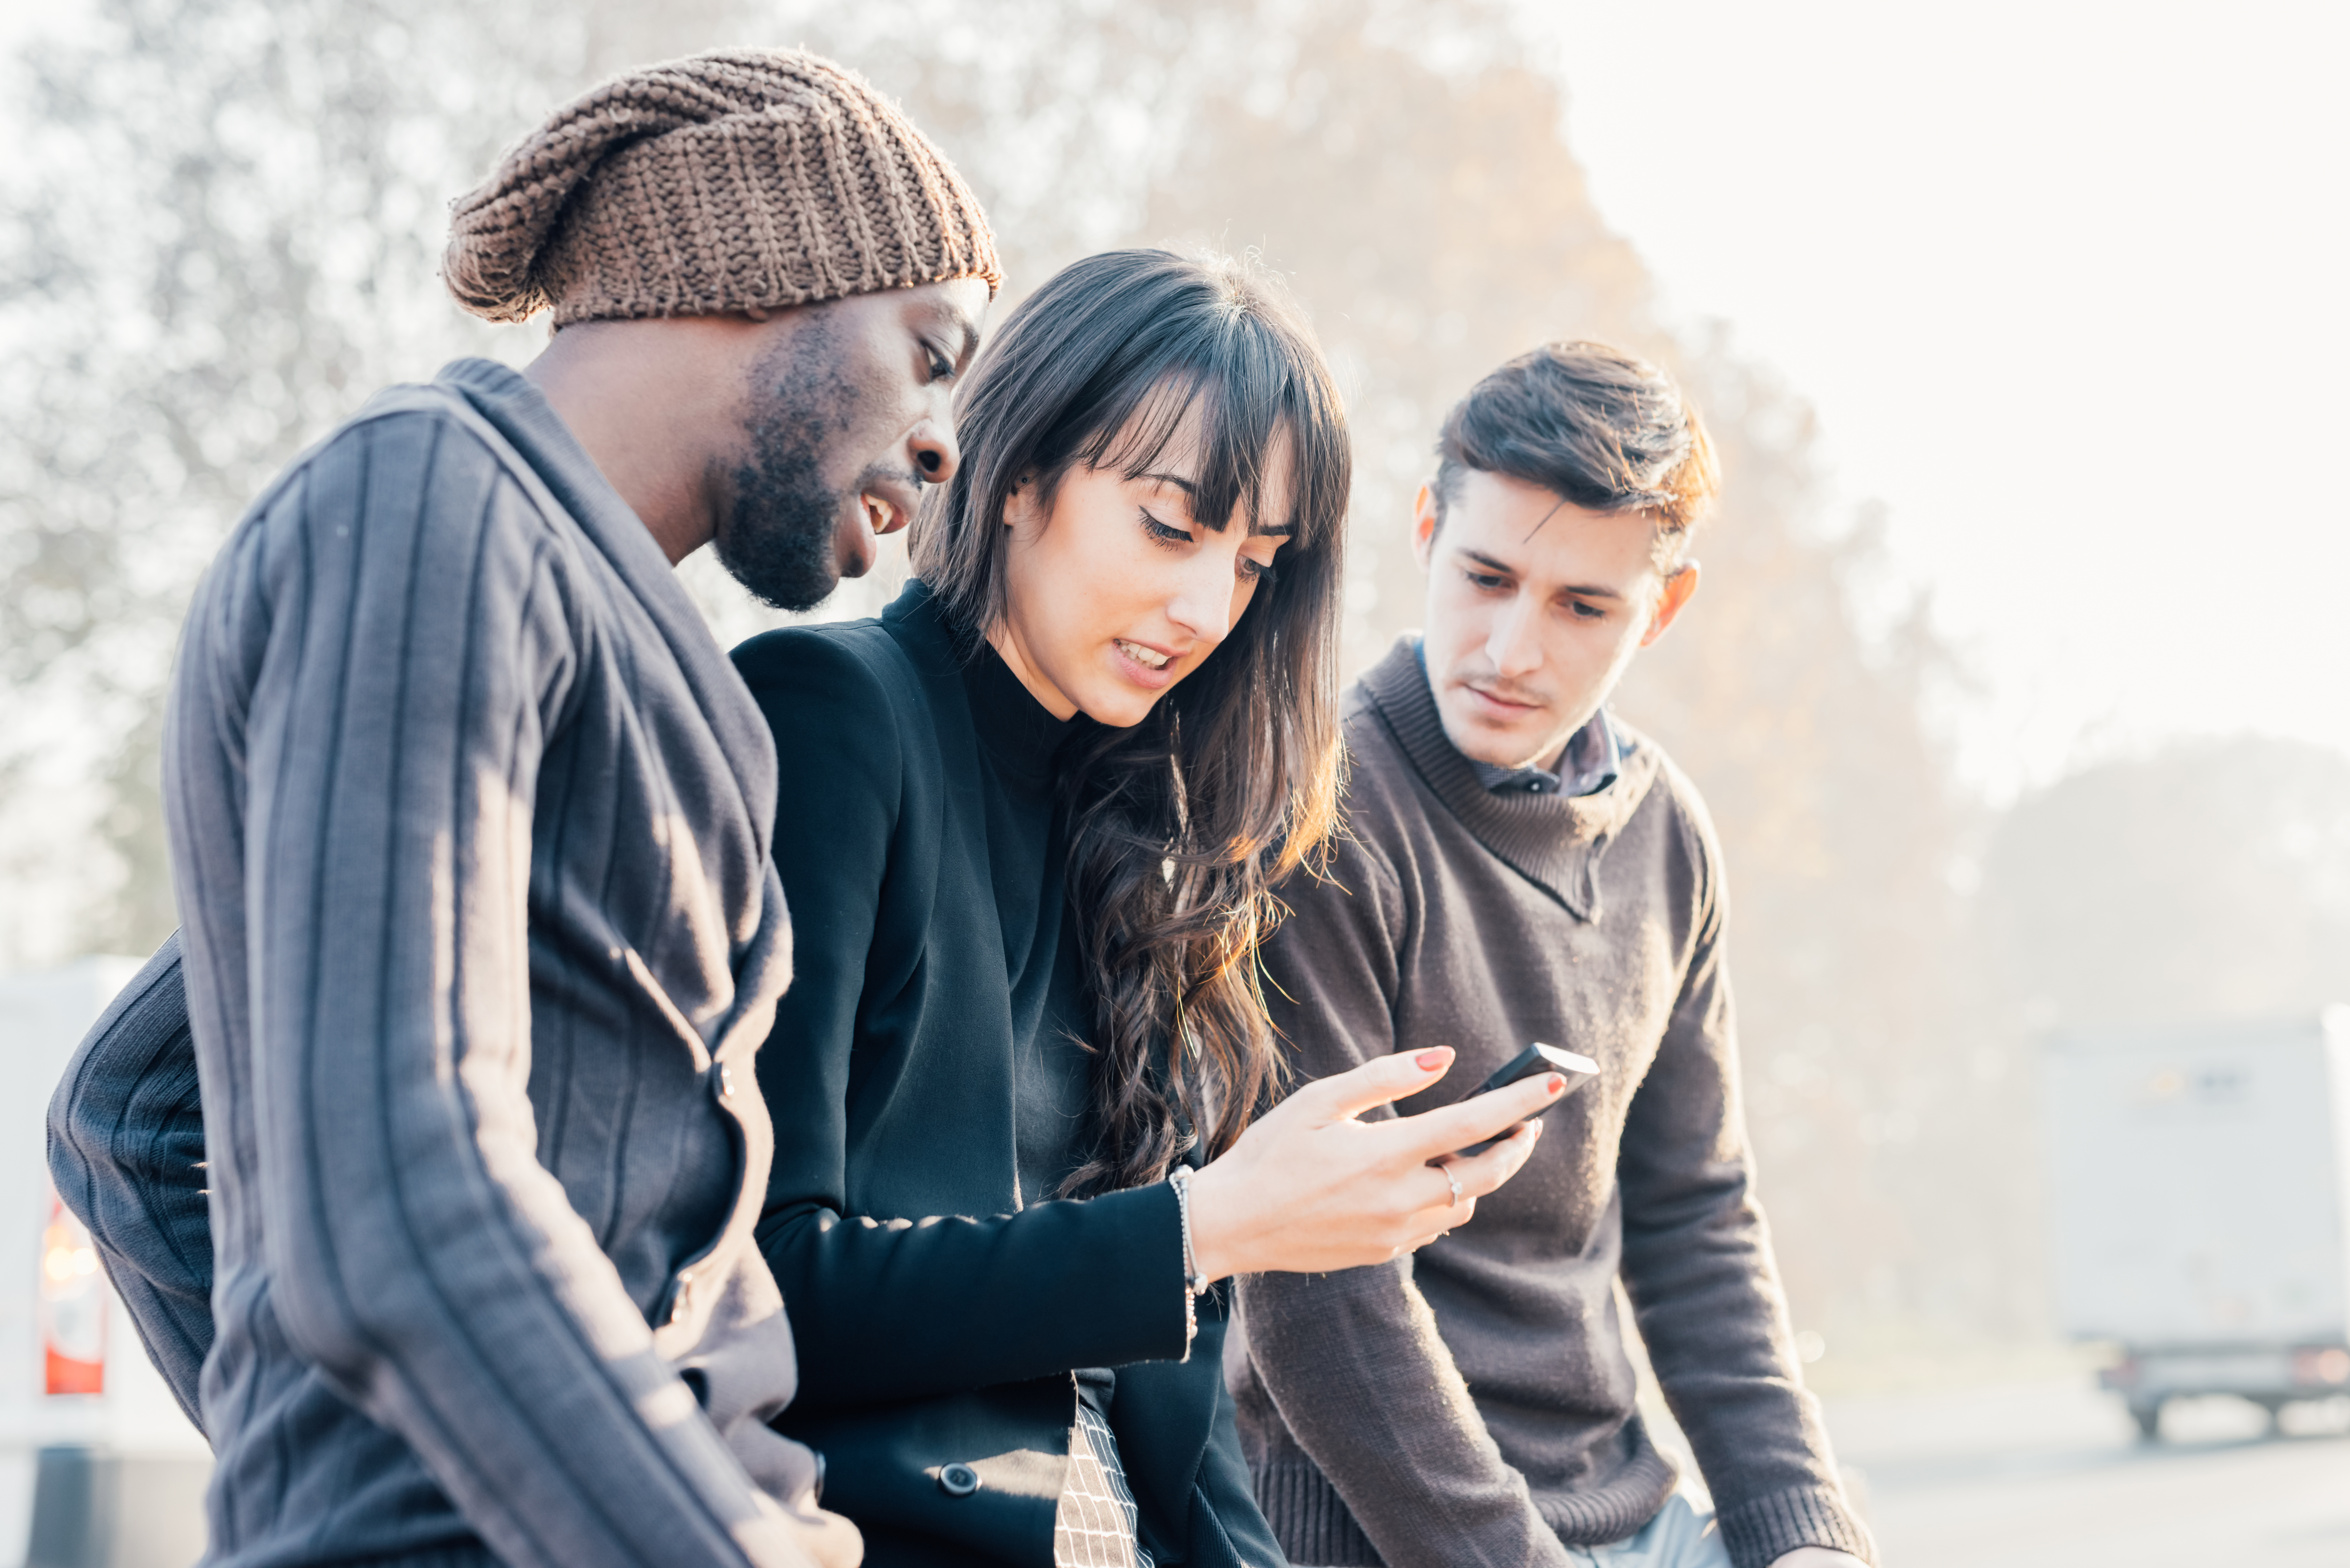 3 Reasons Why Your Organization Should Target Millennials